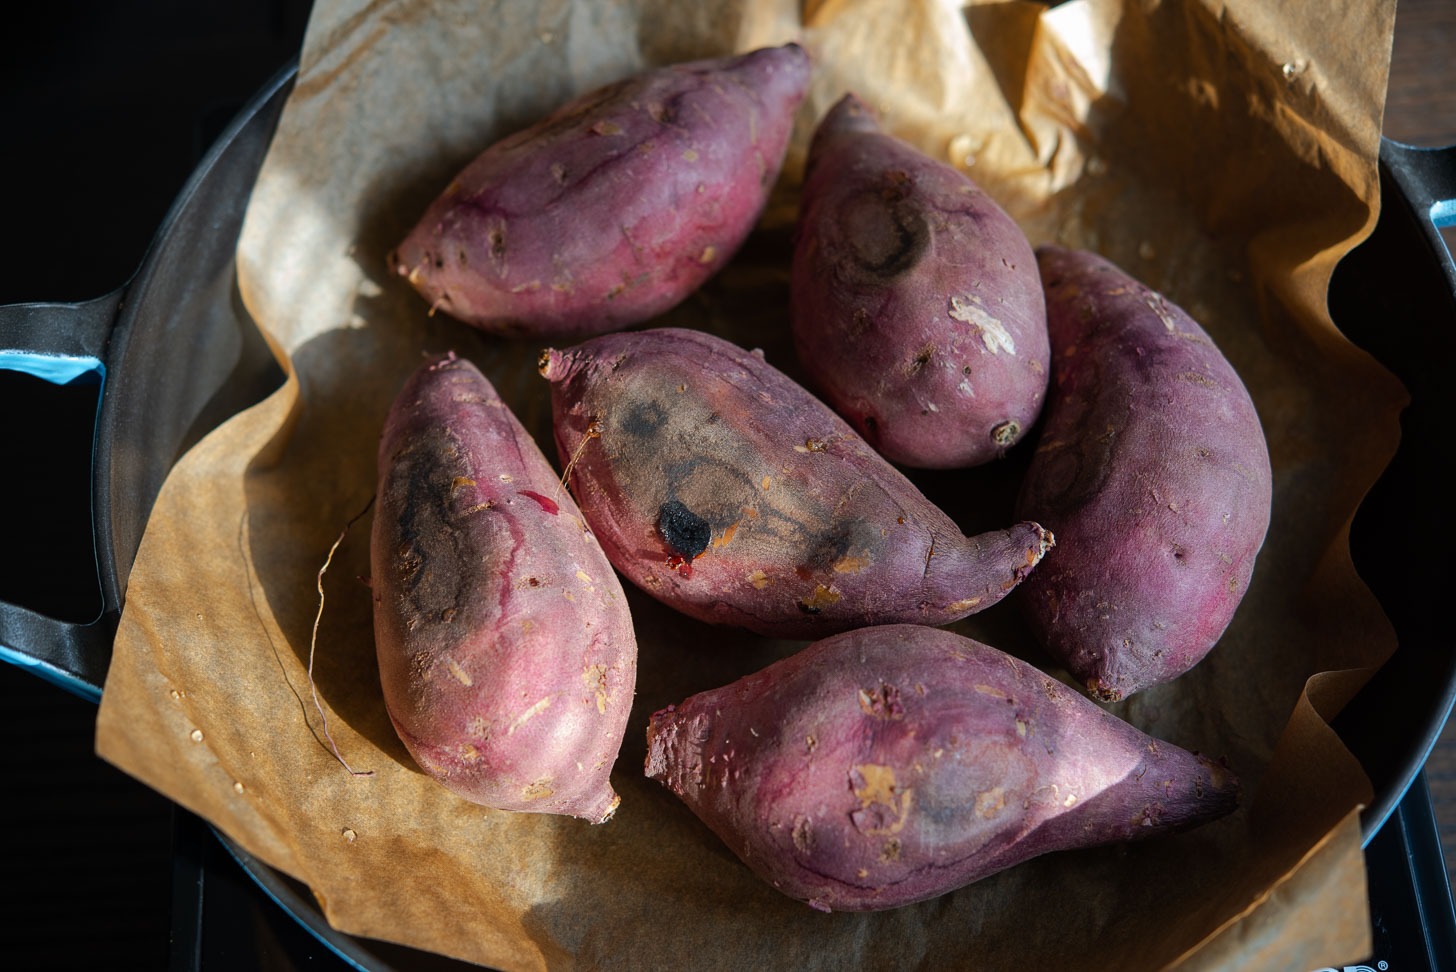 Pan roasted Korean sweet potatoes are charred on the outside.